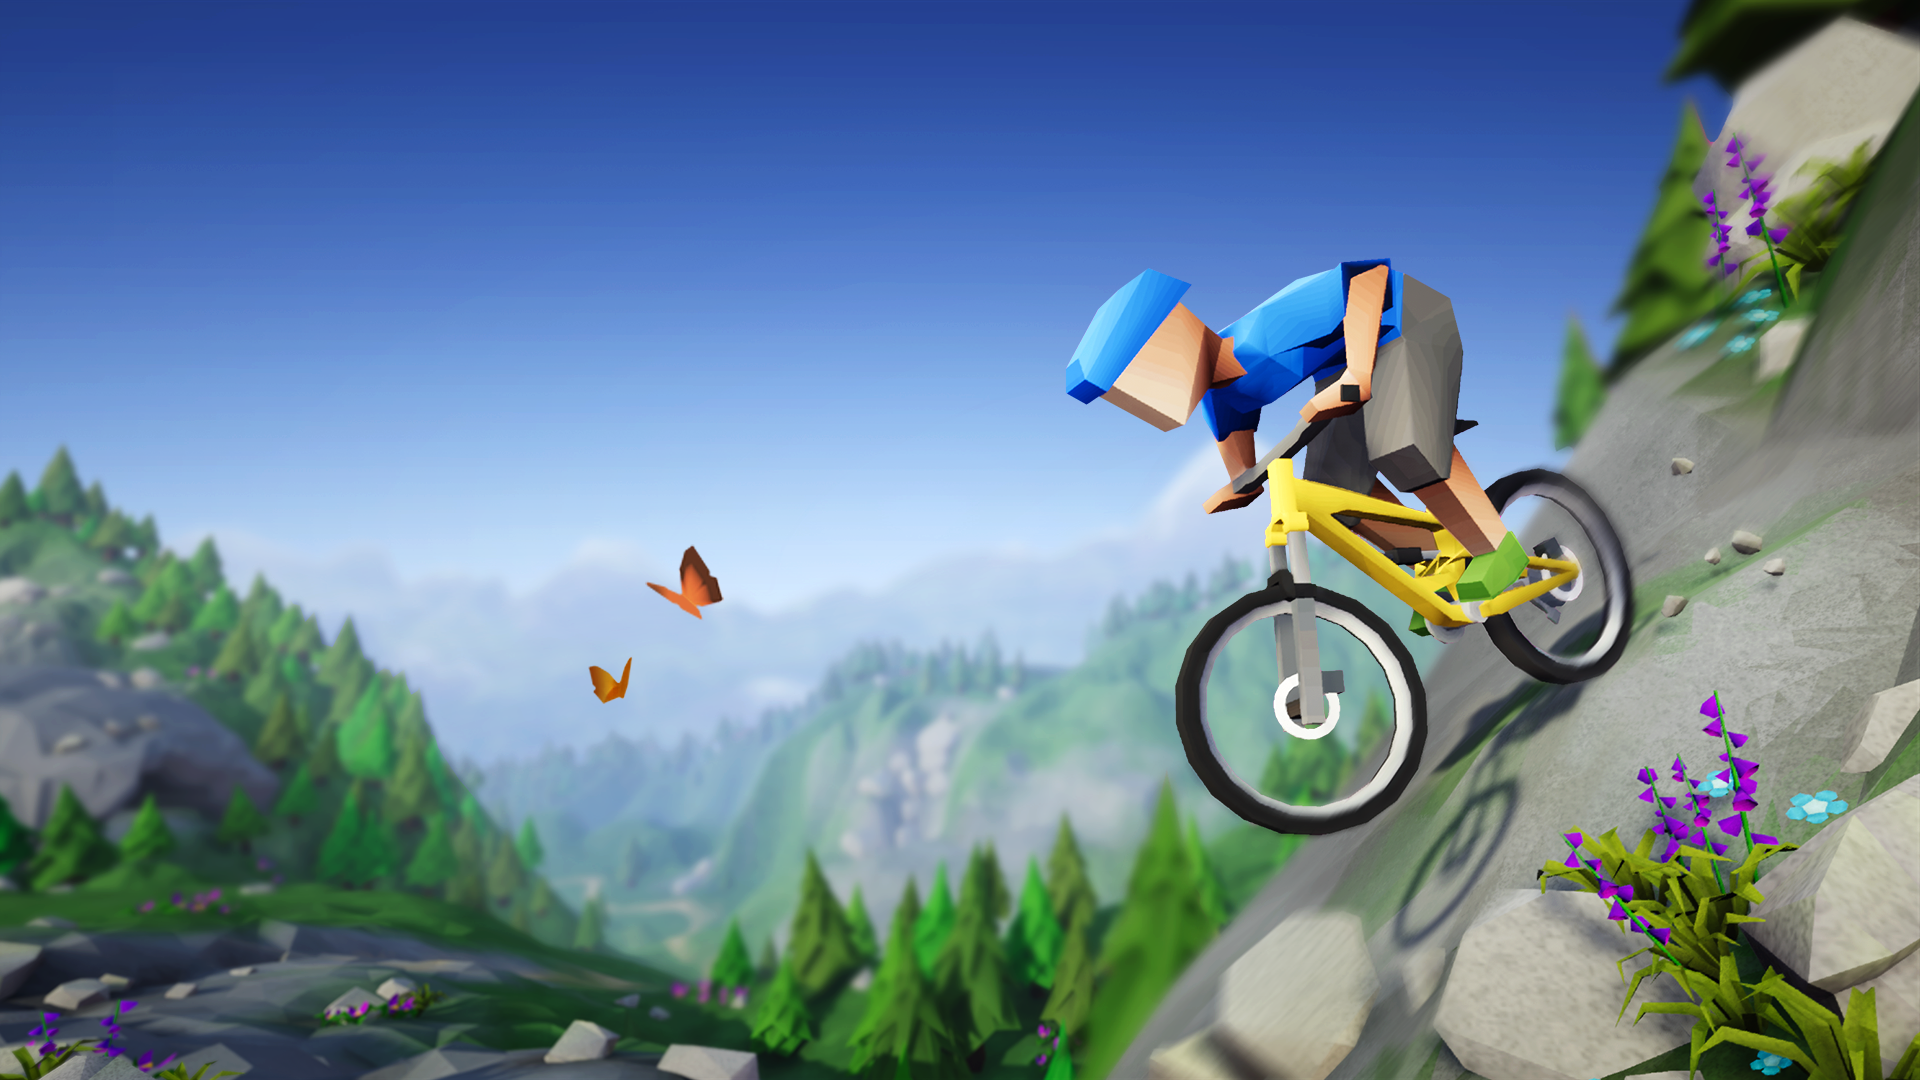 LonelyMountainsDownhill review featured